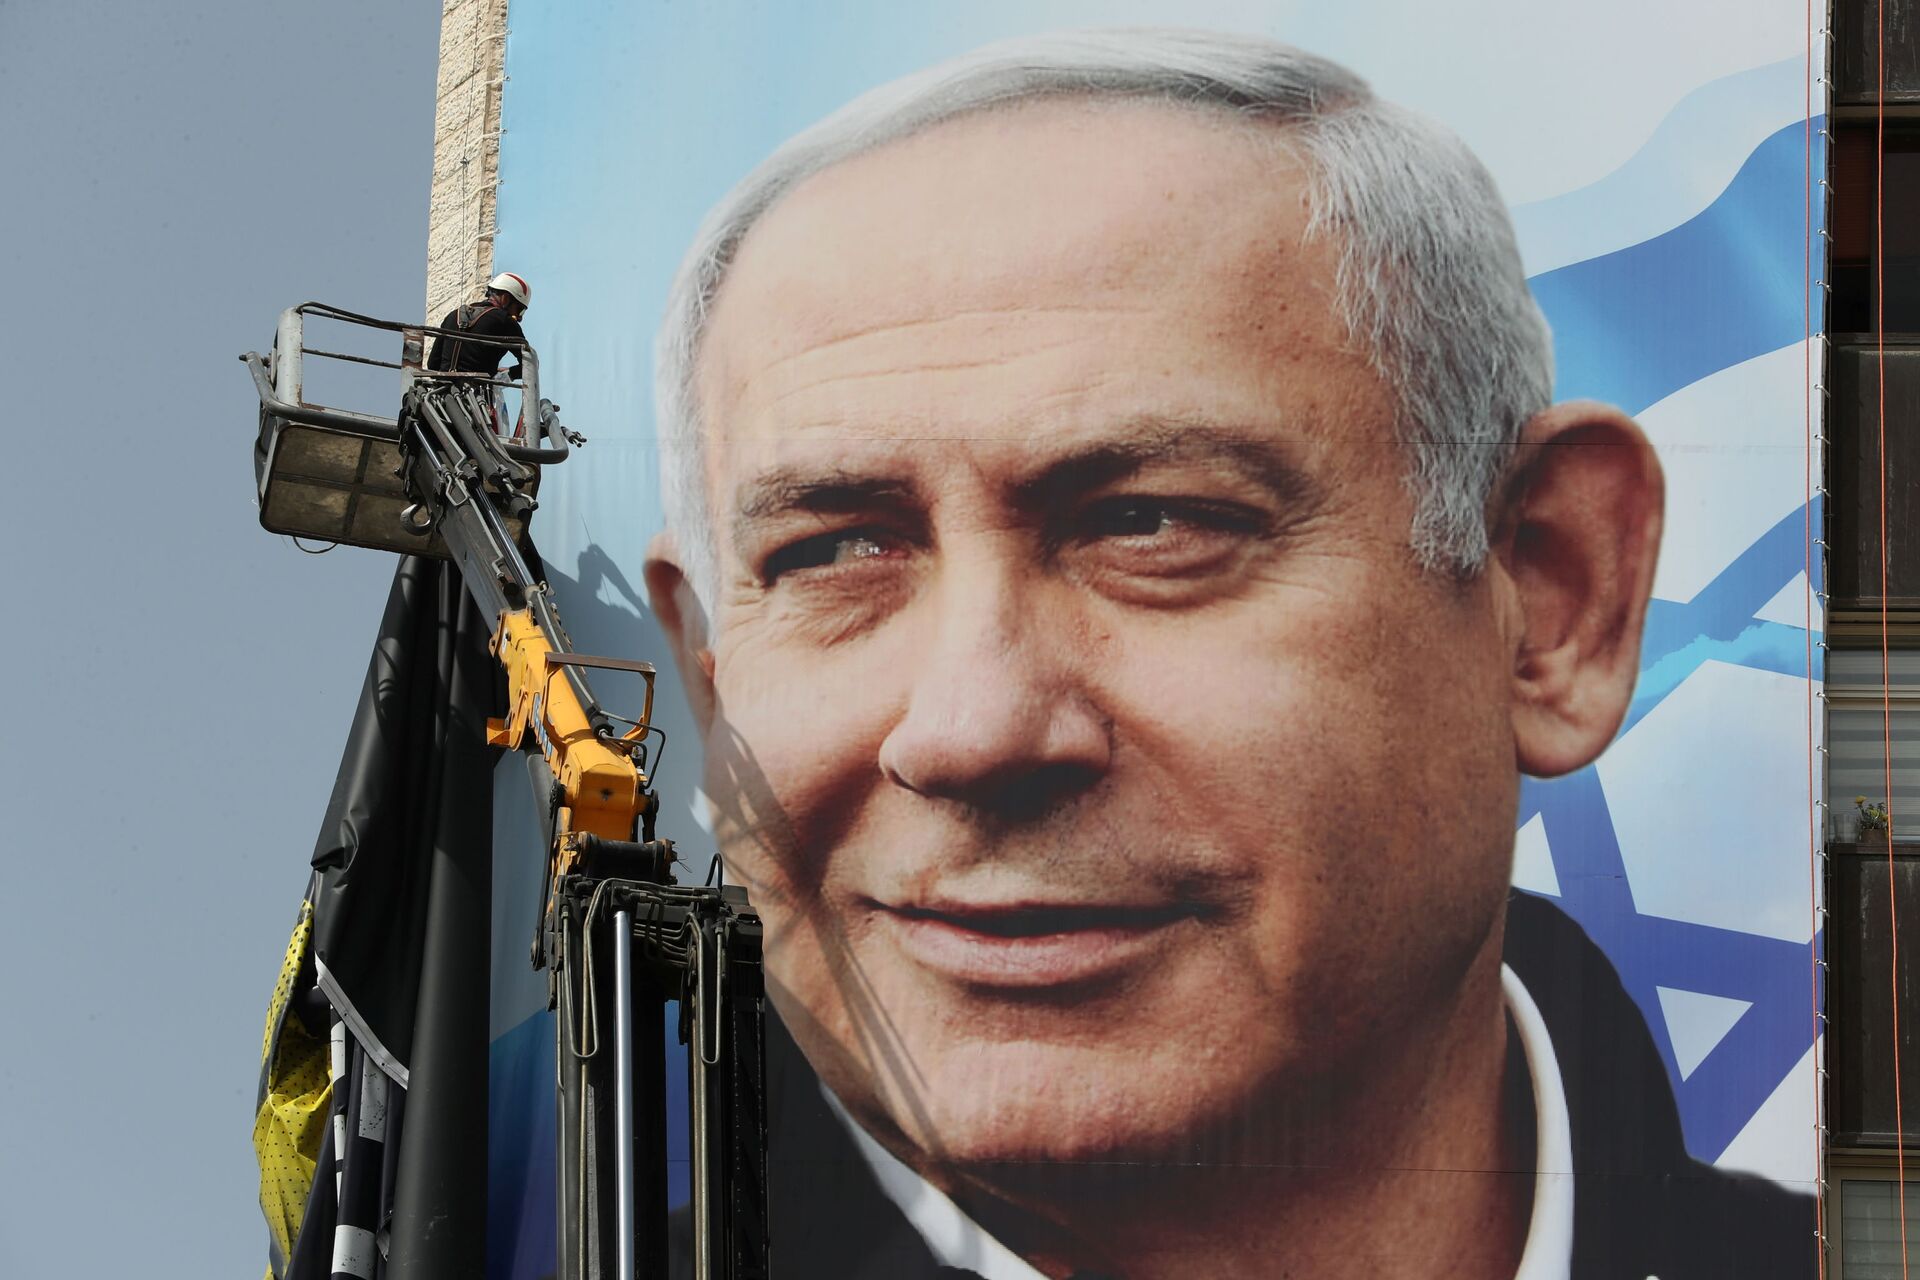 Netanyahu Hasn't Abandoned Election Hopes, Counting on Allies and Defectors to Achieve His Goal  - Sputnik International, 1920, 19.03.2021